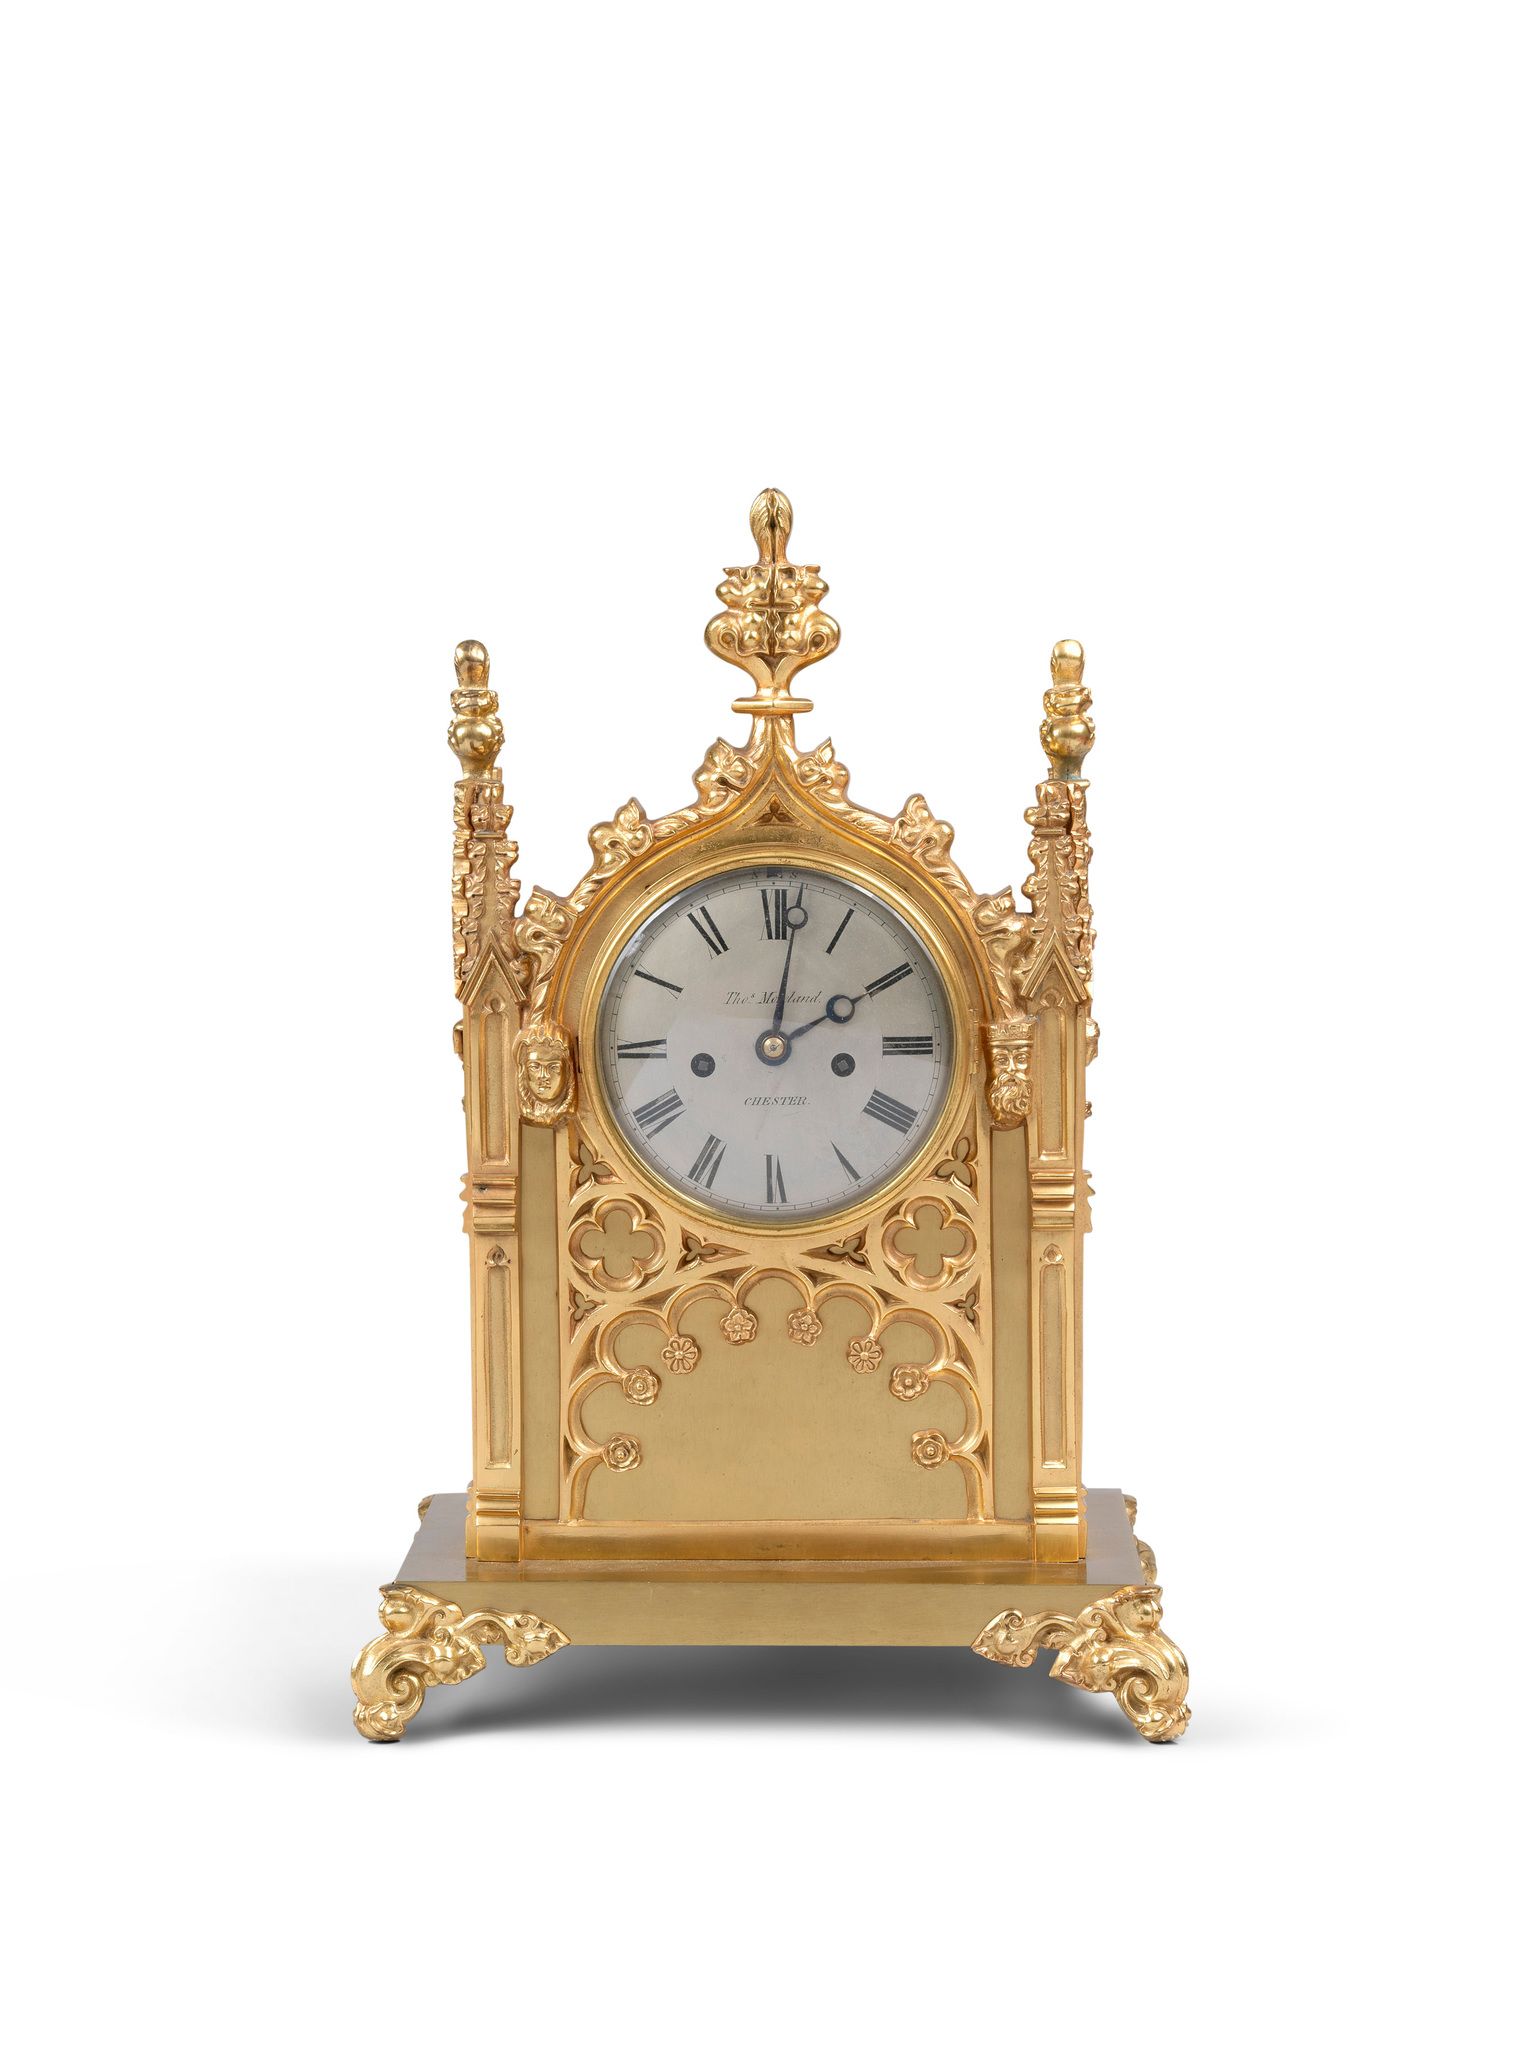 A Gothic Clock England circa 1860, signed Thos Moreland, Chester, the silvered face with Roman